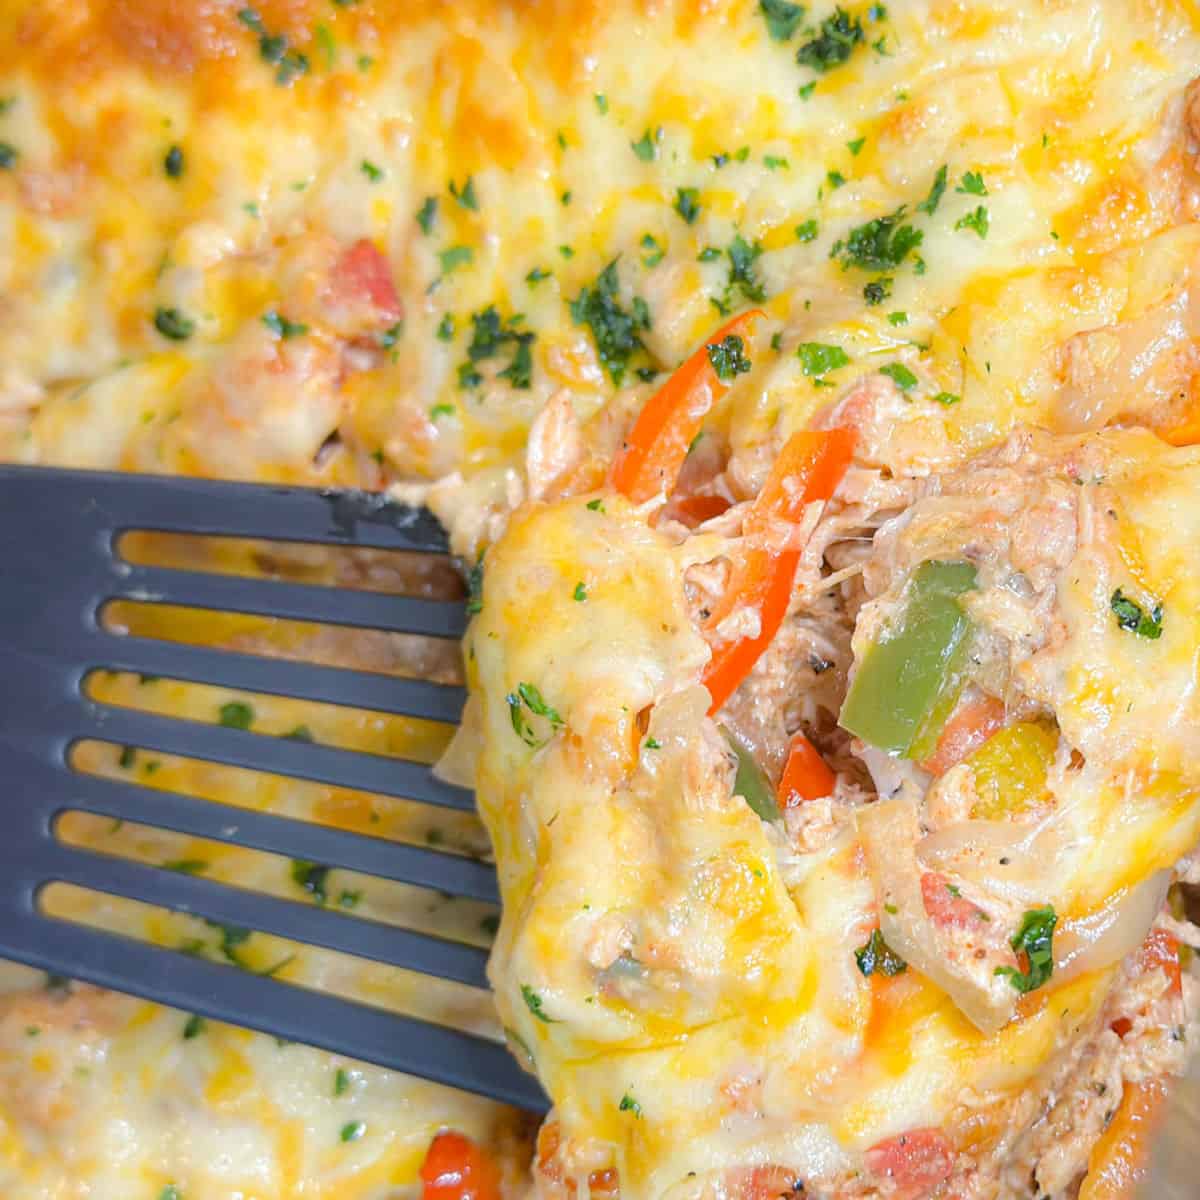 A decadent closeup of chicken fajita casserole melted with cheese being scooped by a black spatula. Gooey cheese covers shredded chicken mixed with colorful peppers and creamy sauce garnished with cilantro